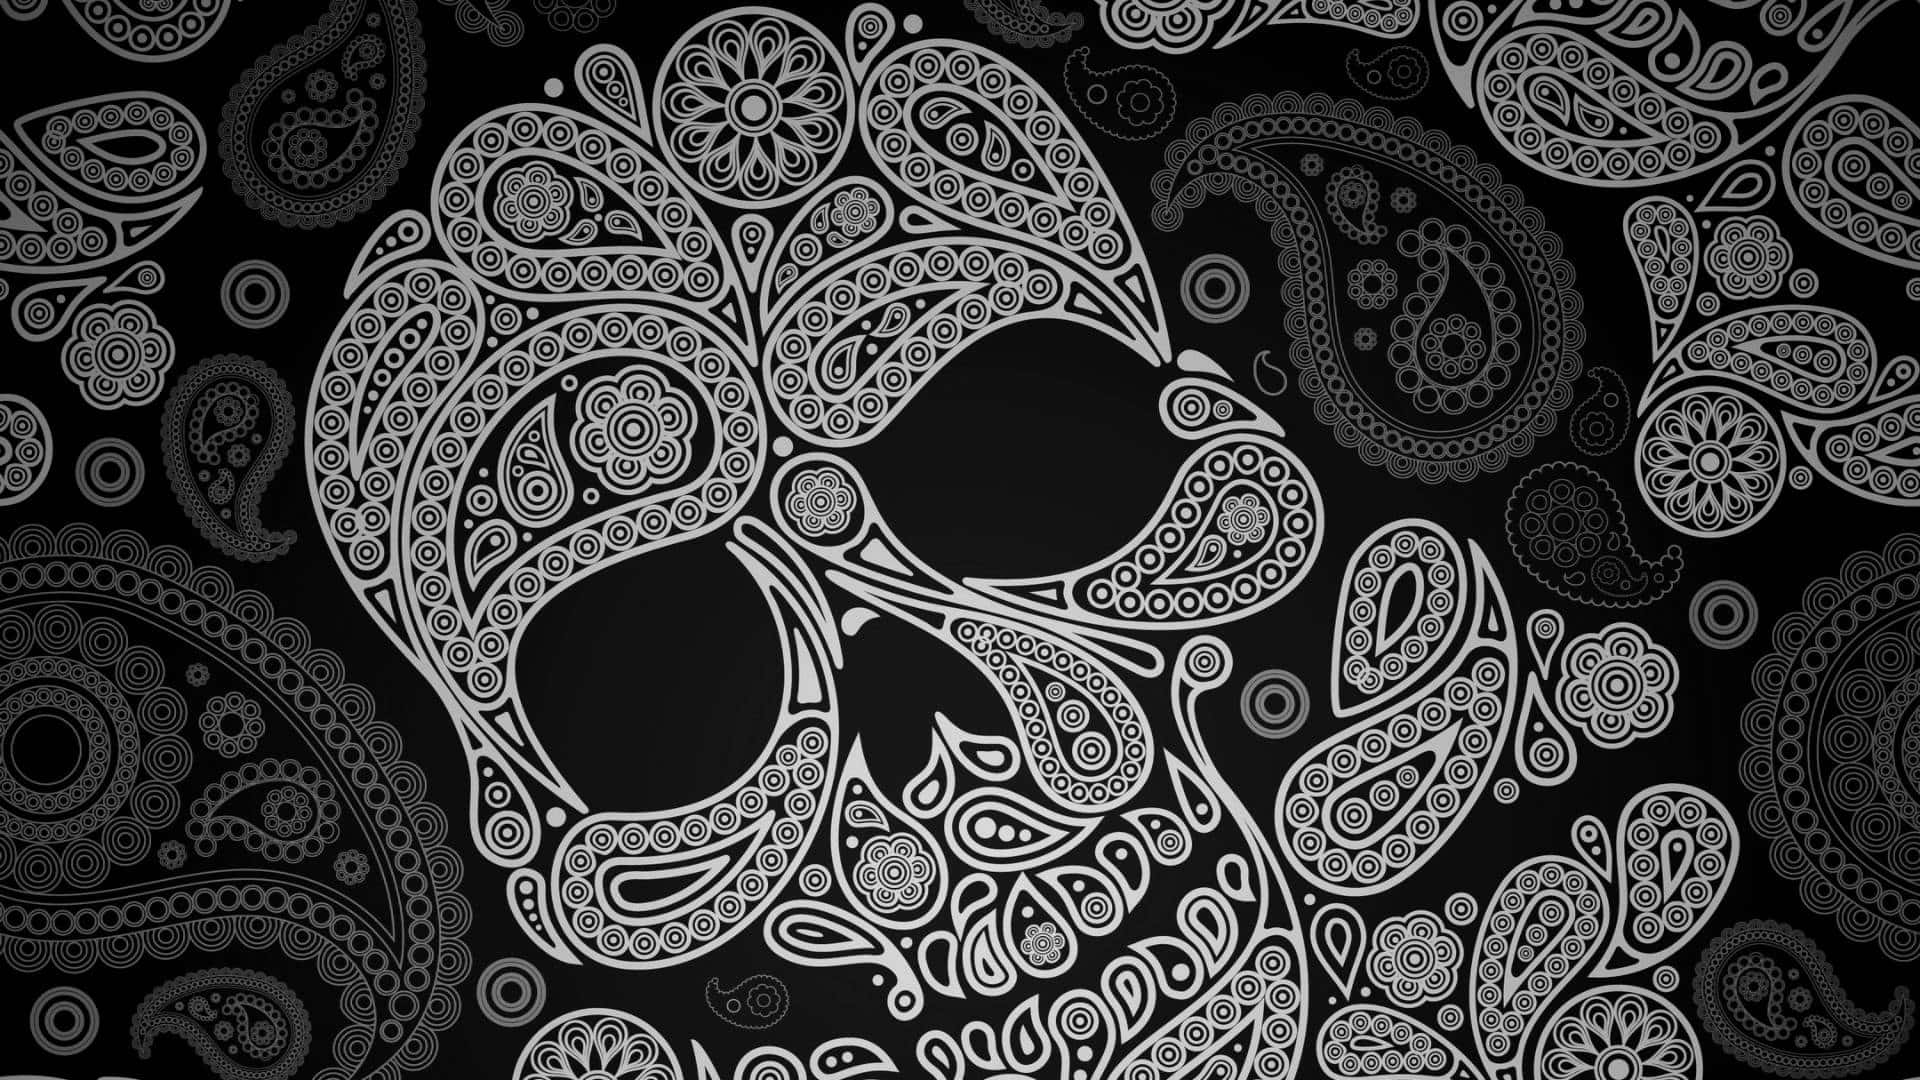 "Celebrate Life and Make a Statement with A Sugar Skull Phone" Wallpaper